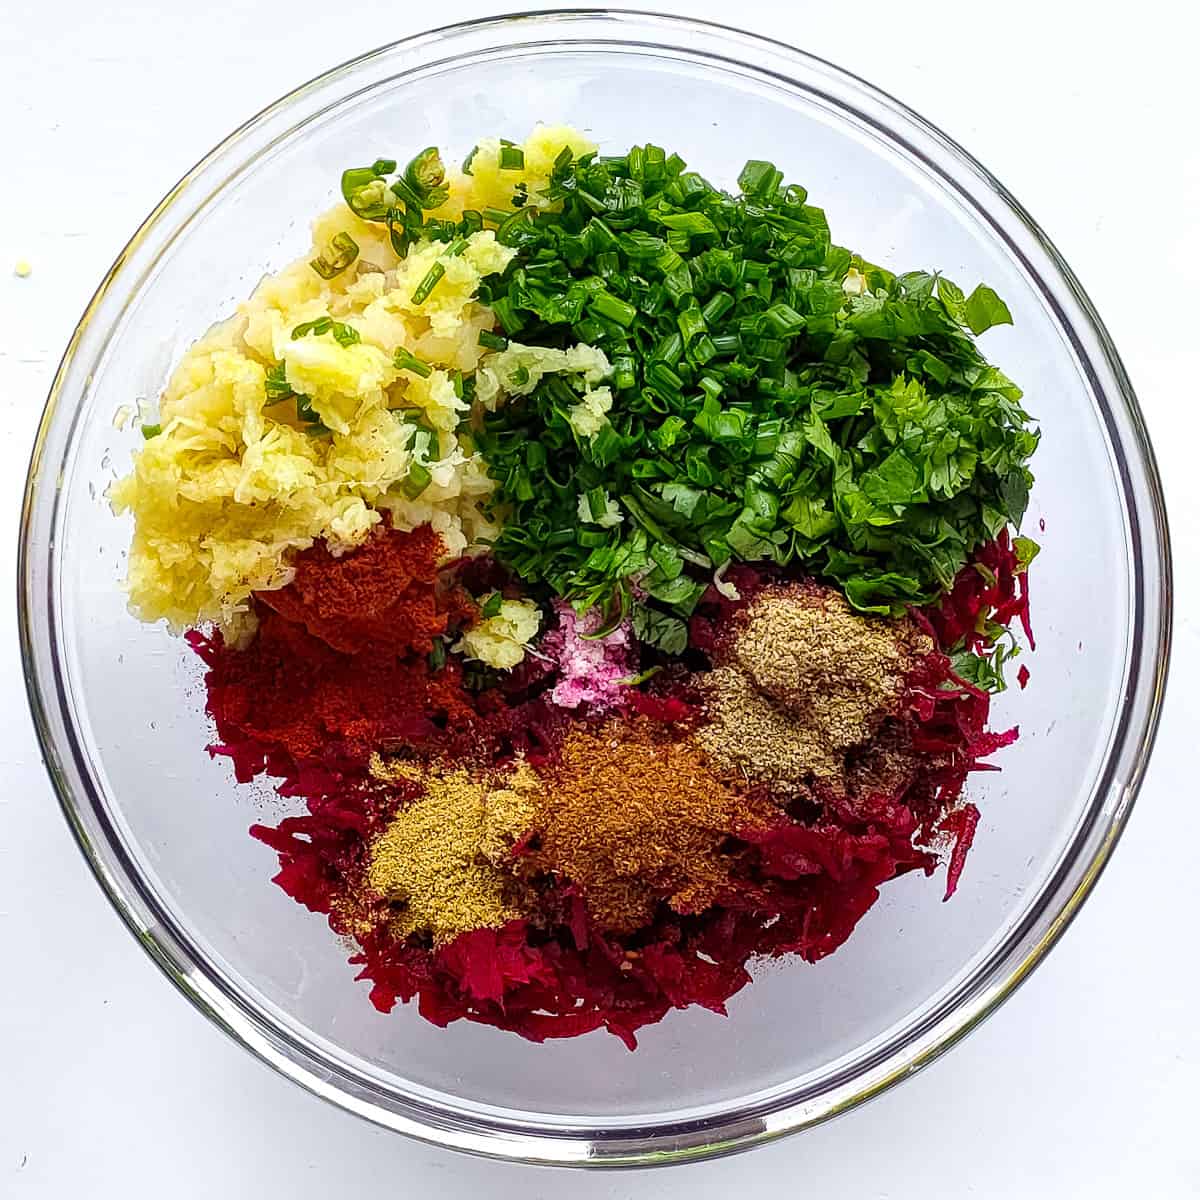 Ingredients for the mixture for making beetroot tikki in a glass bowl.